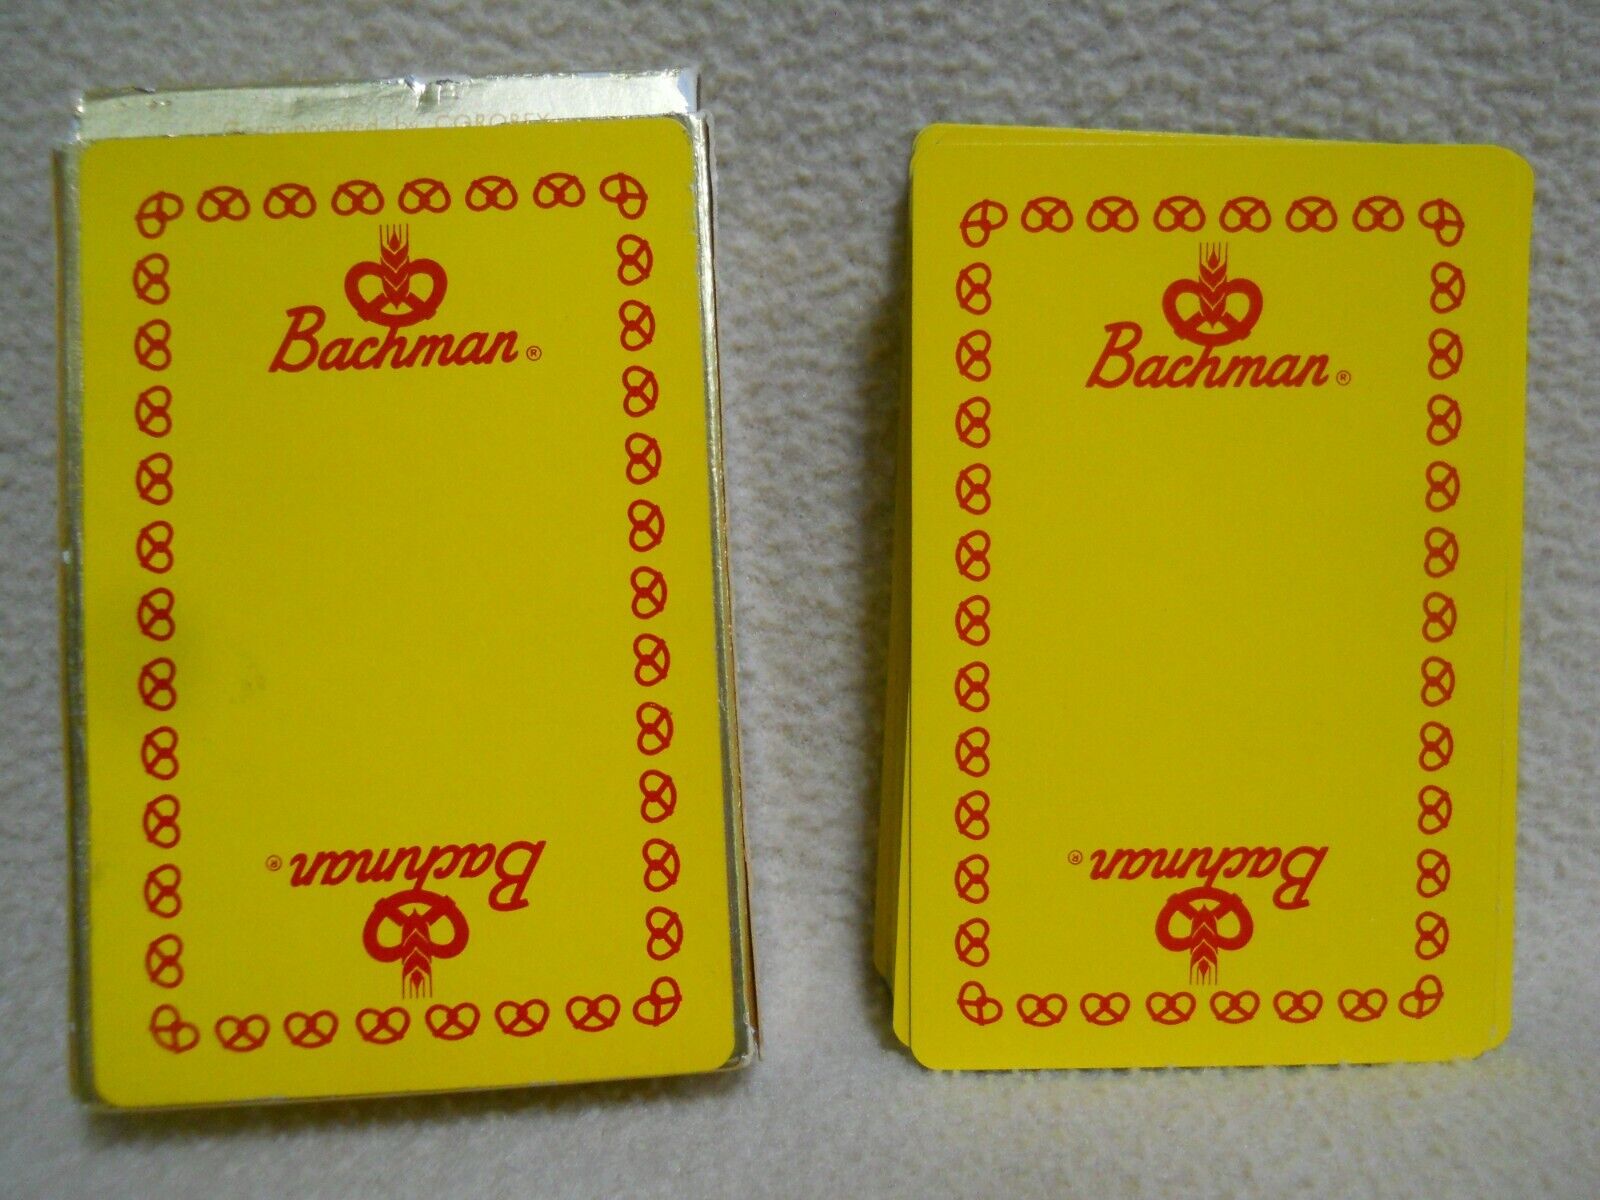 Vintage Bachman Pretzel Advertising Playing Cards / Pinochle 